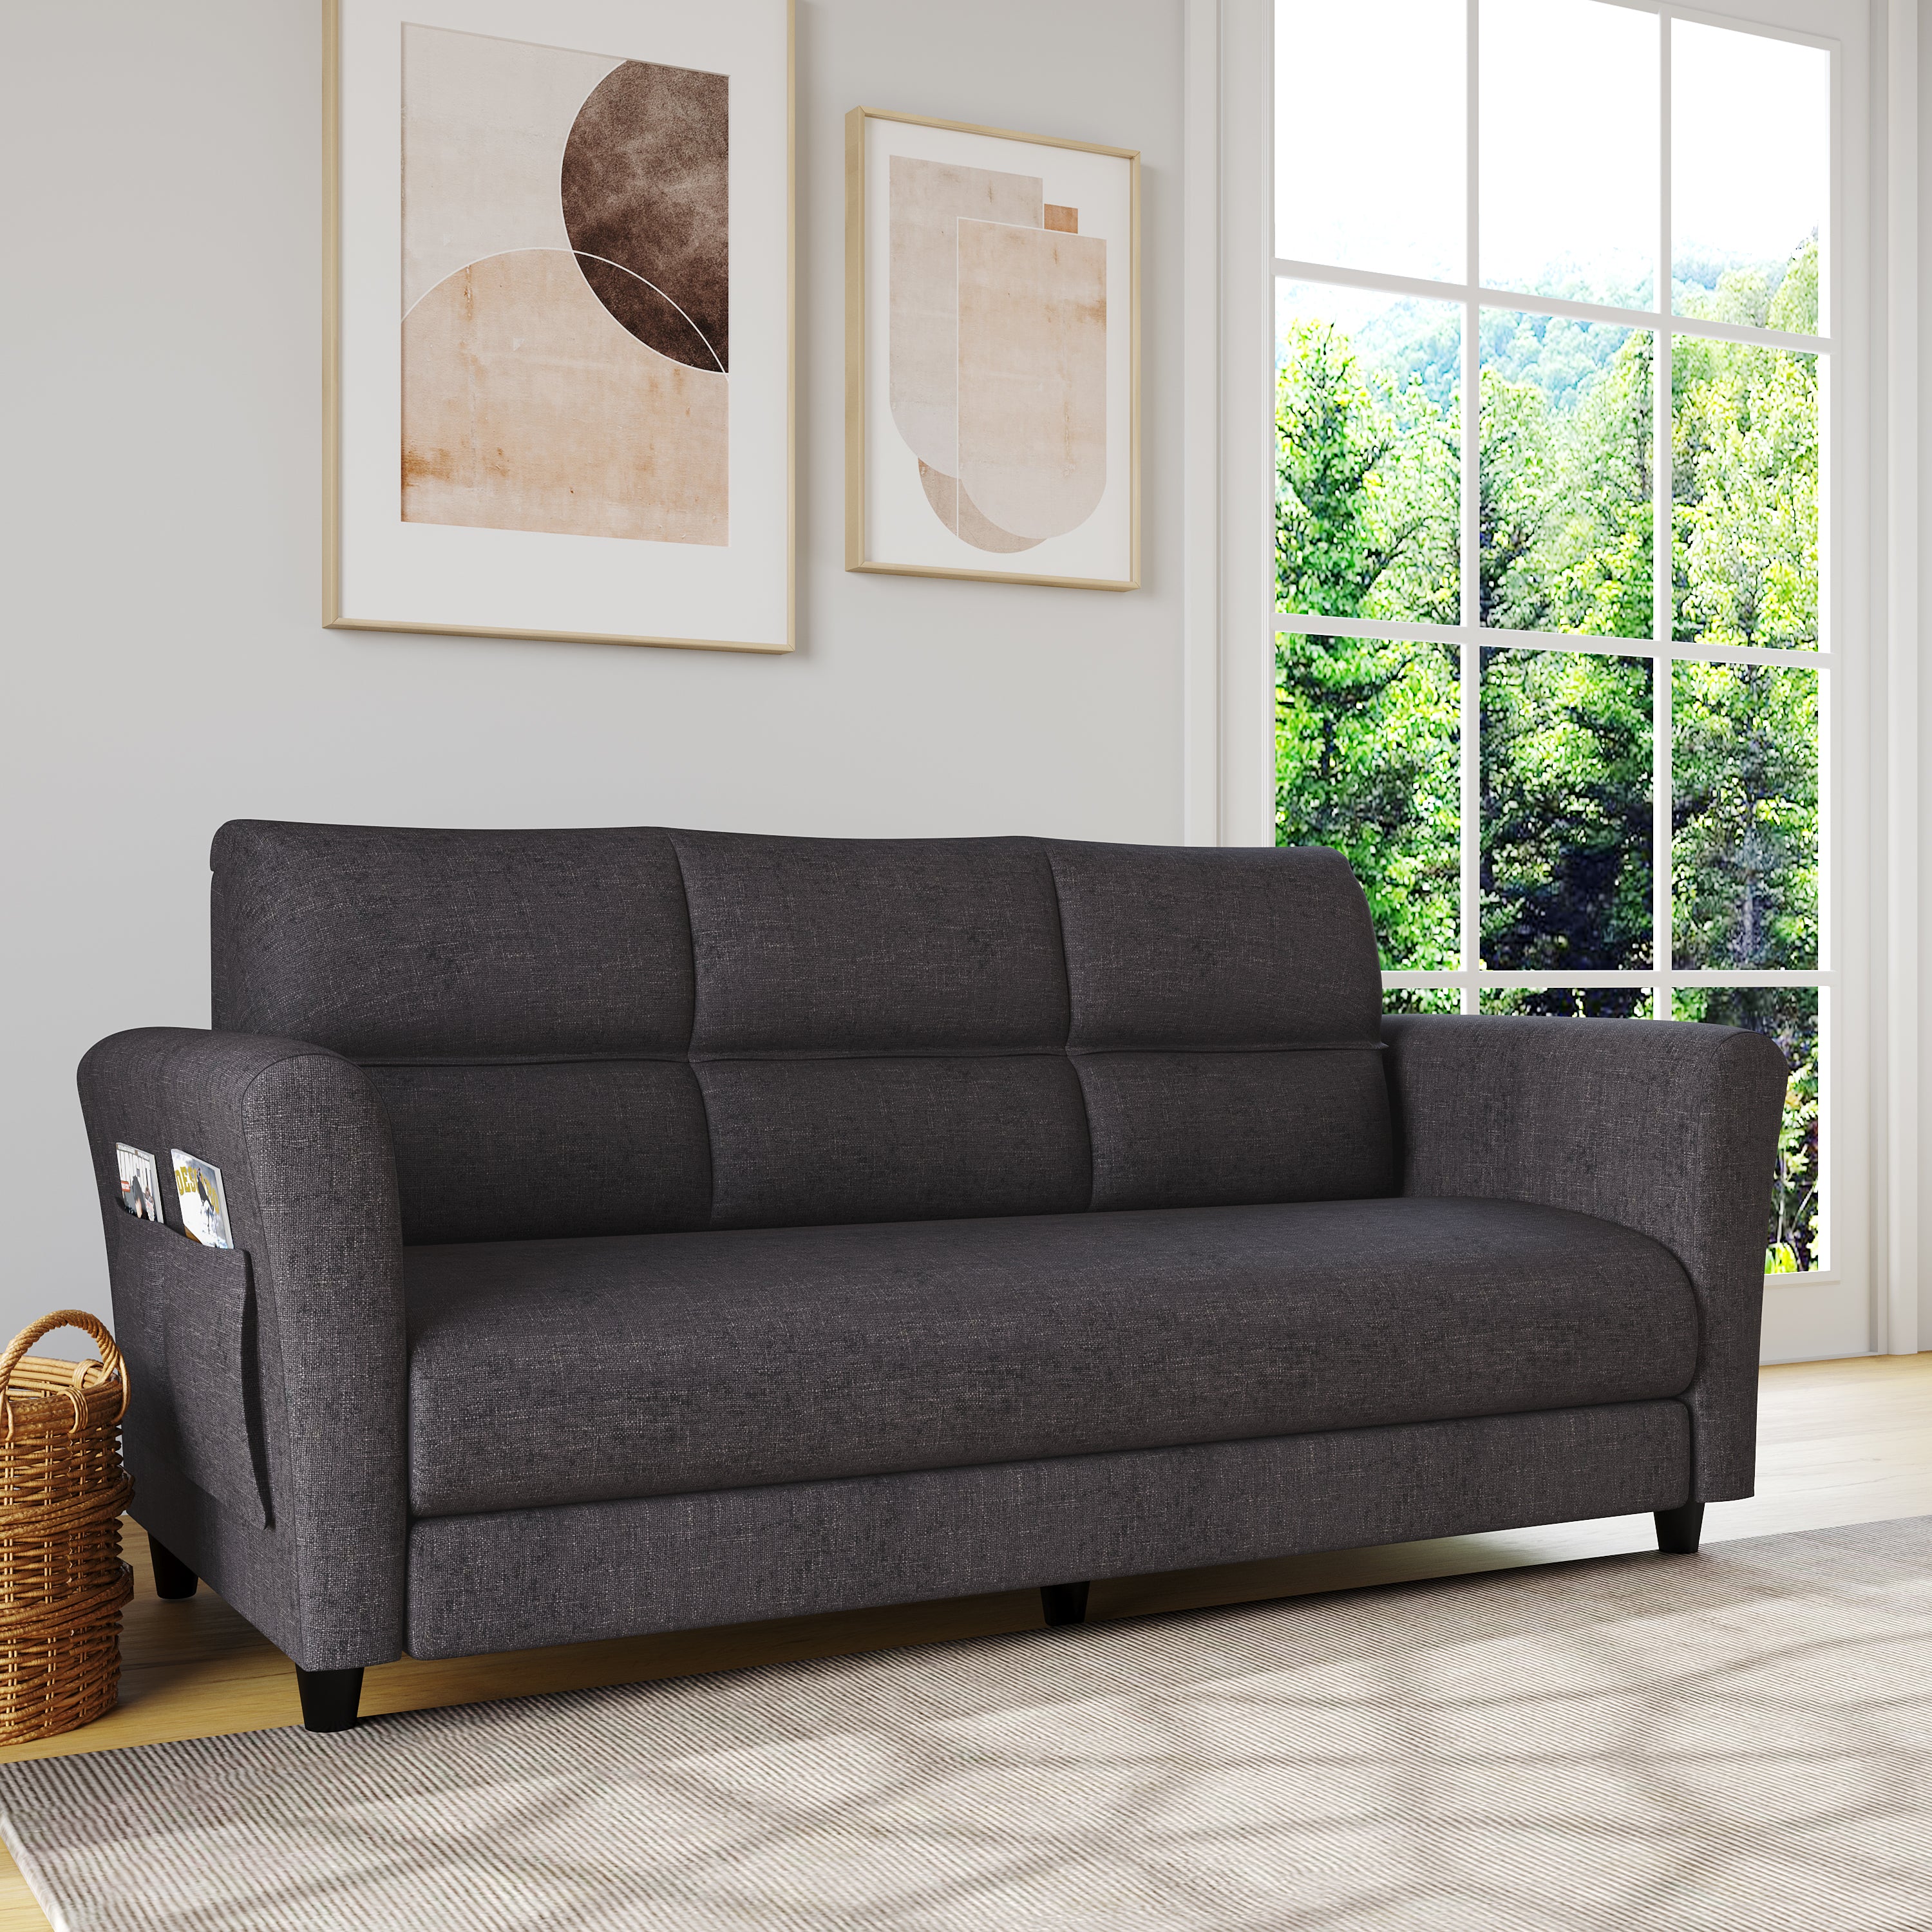 Hombre banda Cañón Buy Oliver 3 Seater Fabric Sofa With Side Pocket (Grey)Online- @Home by  Nilkamal | Nilkamal At-home @home